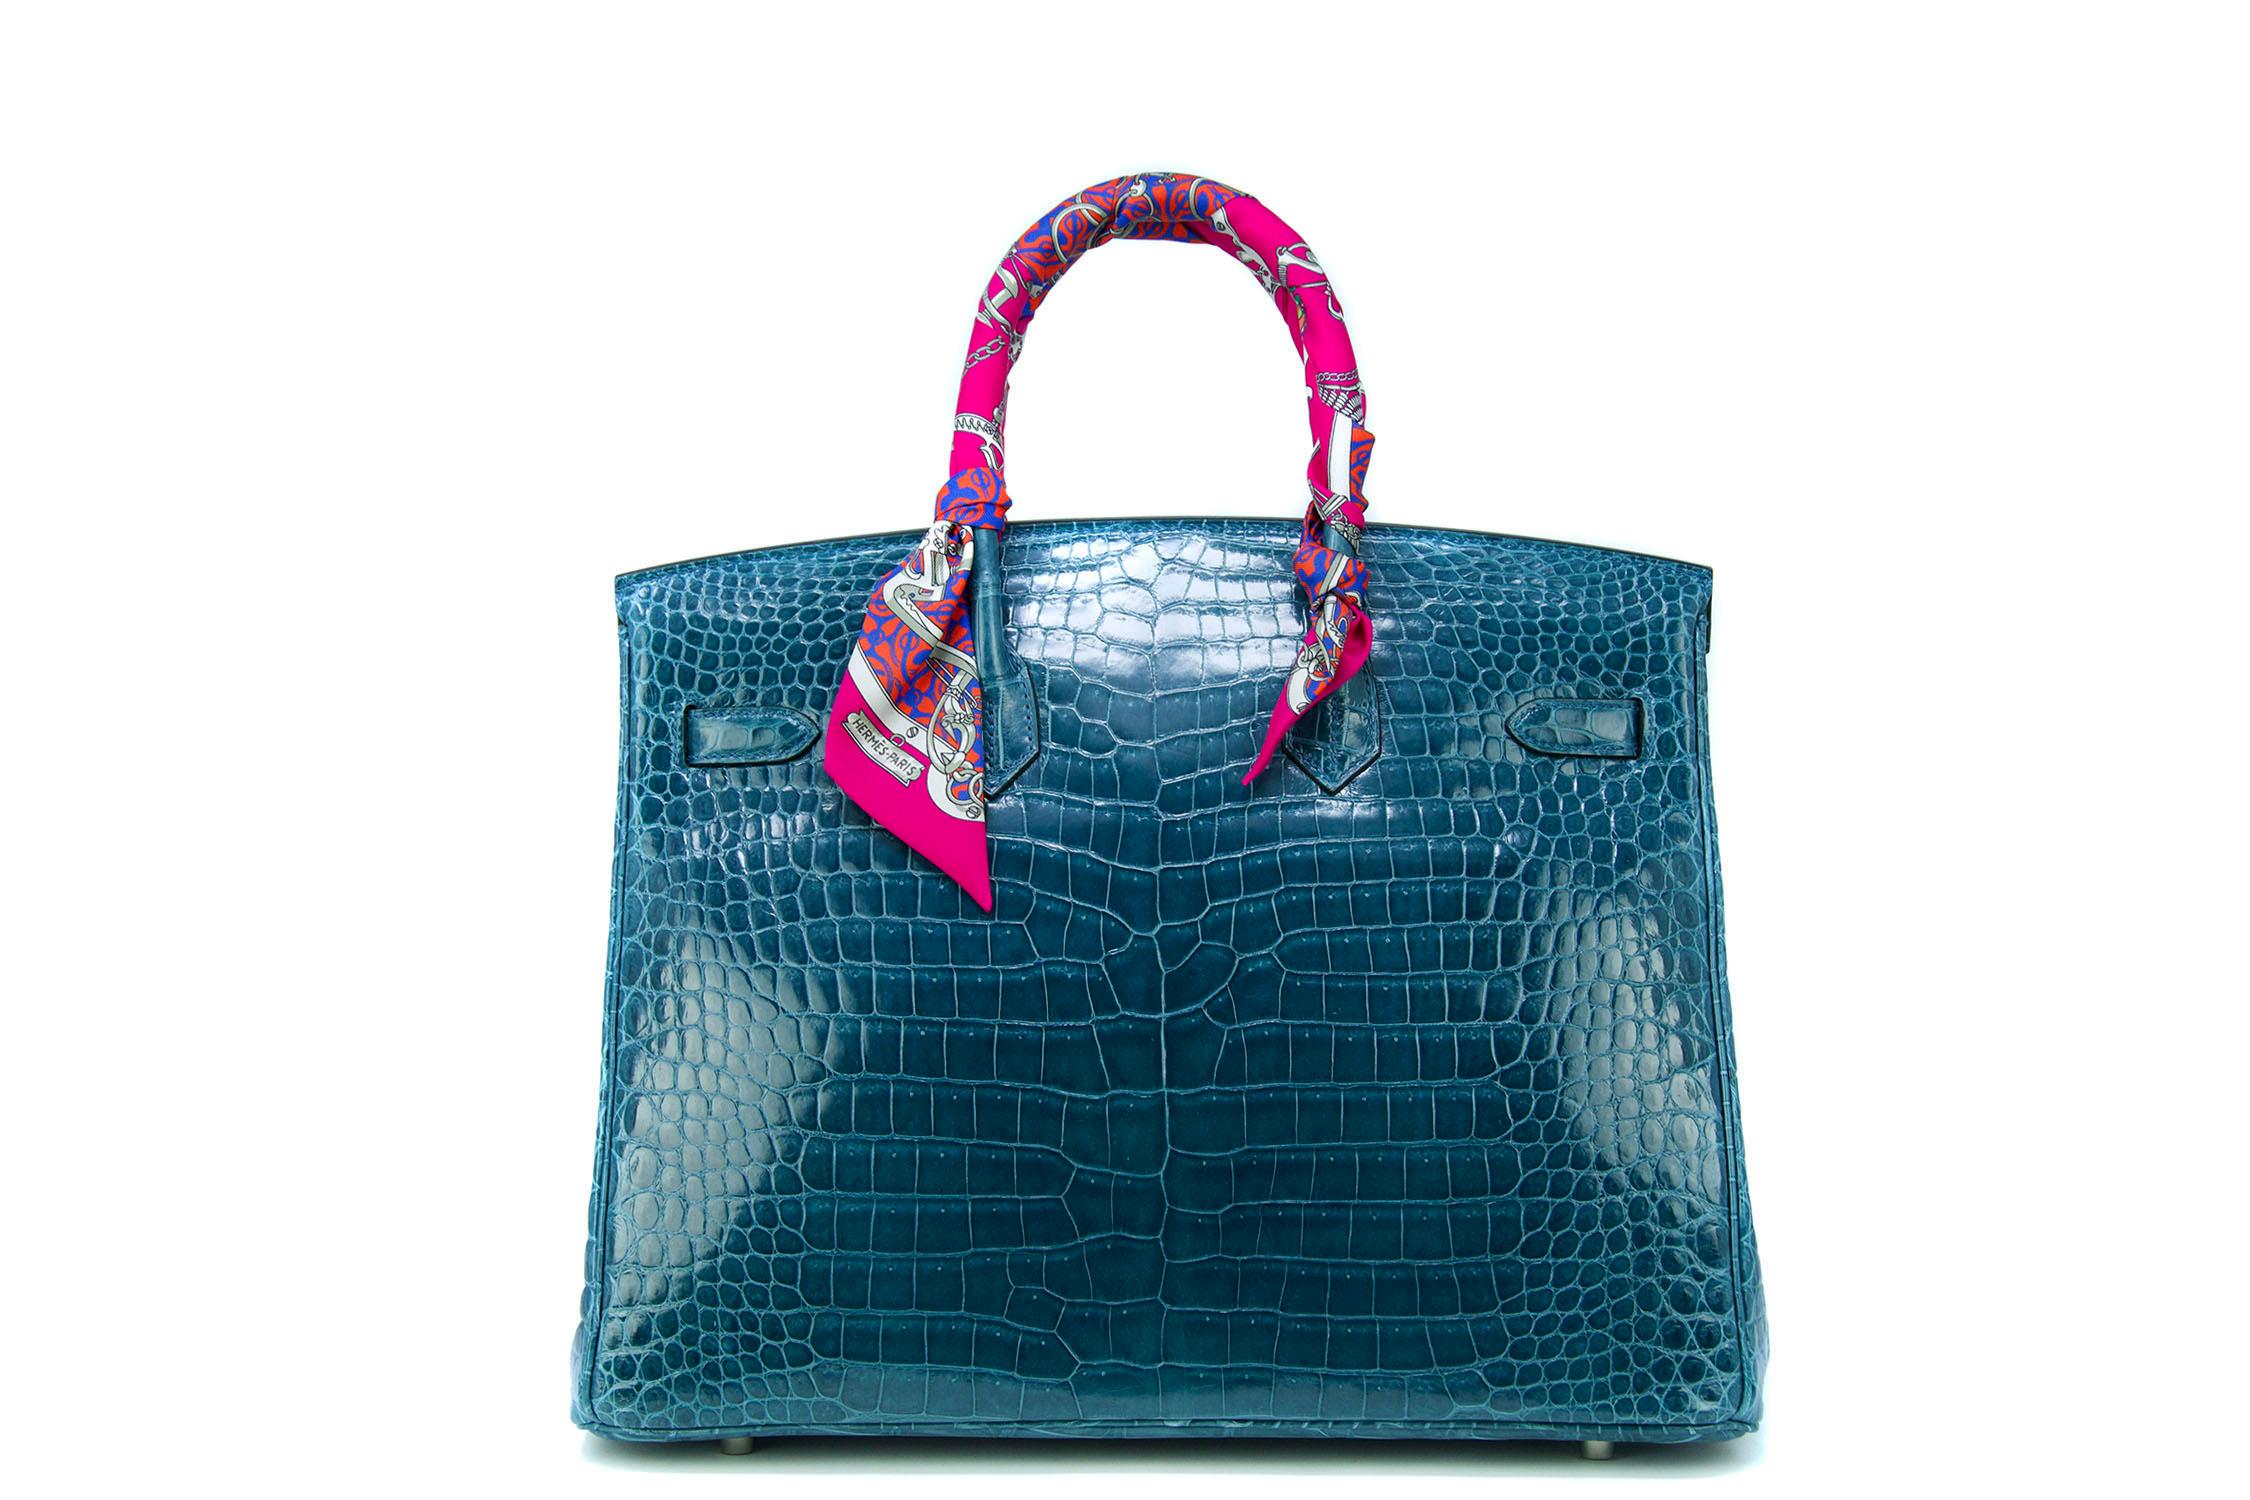 Bleu colvert crocodile porosus Hermes 35 Birkin with palladium hardware. Extremely rare deep turquoise color which has hints of both green and blue.  New with plastic on the hardware.  Comes with Hermes box, dustcover, rain jacket and clochette.  